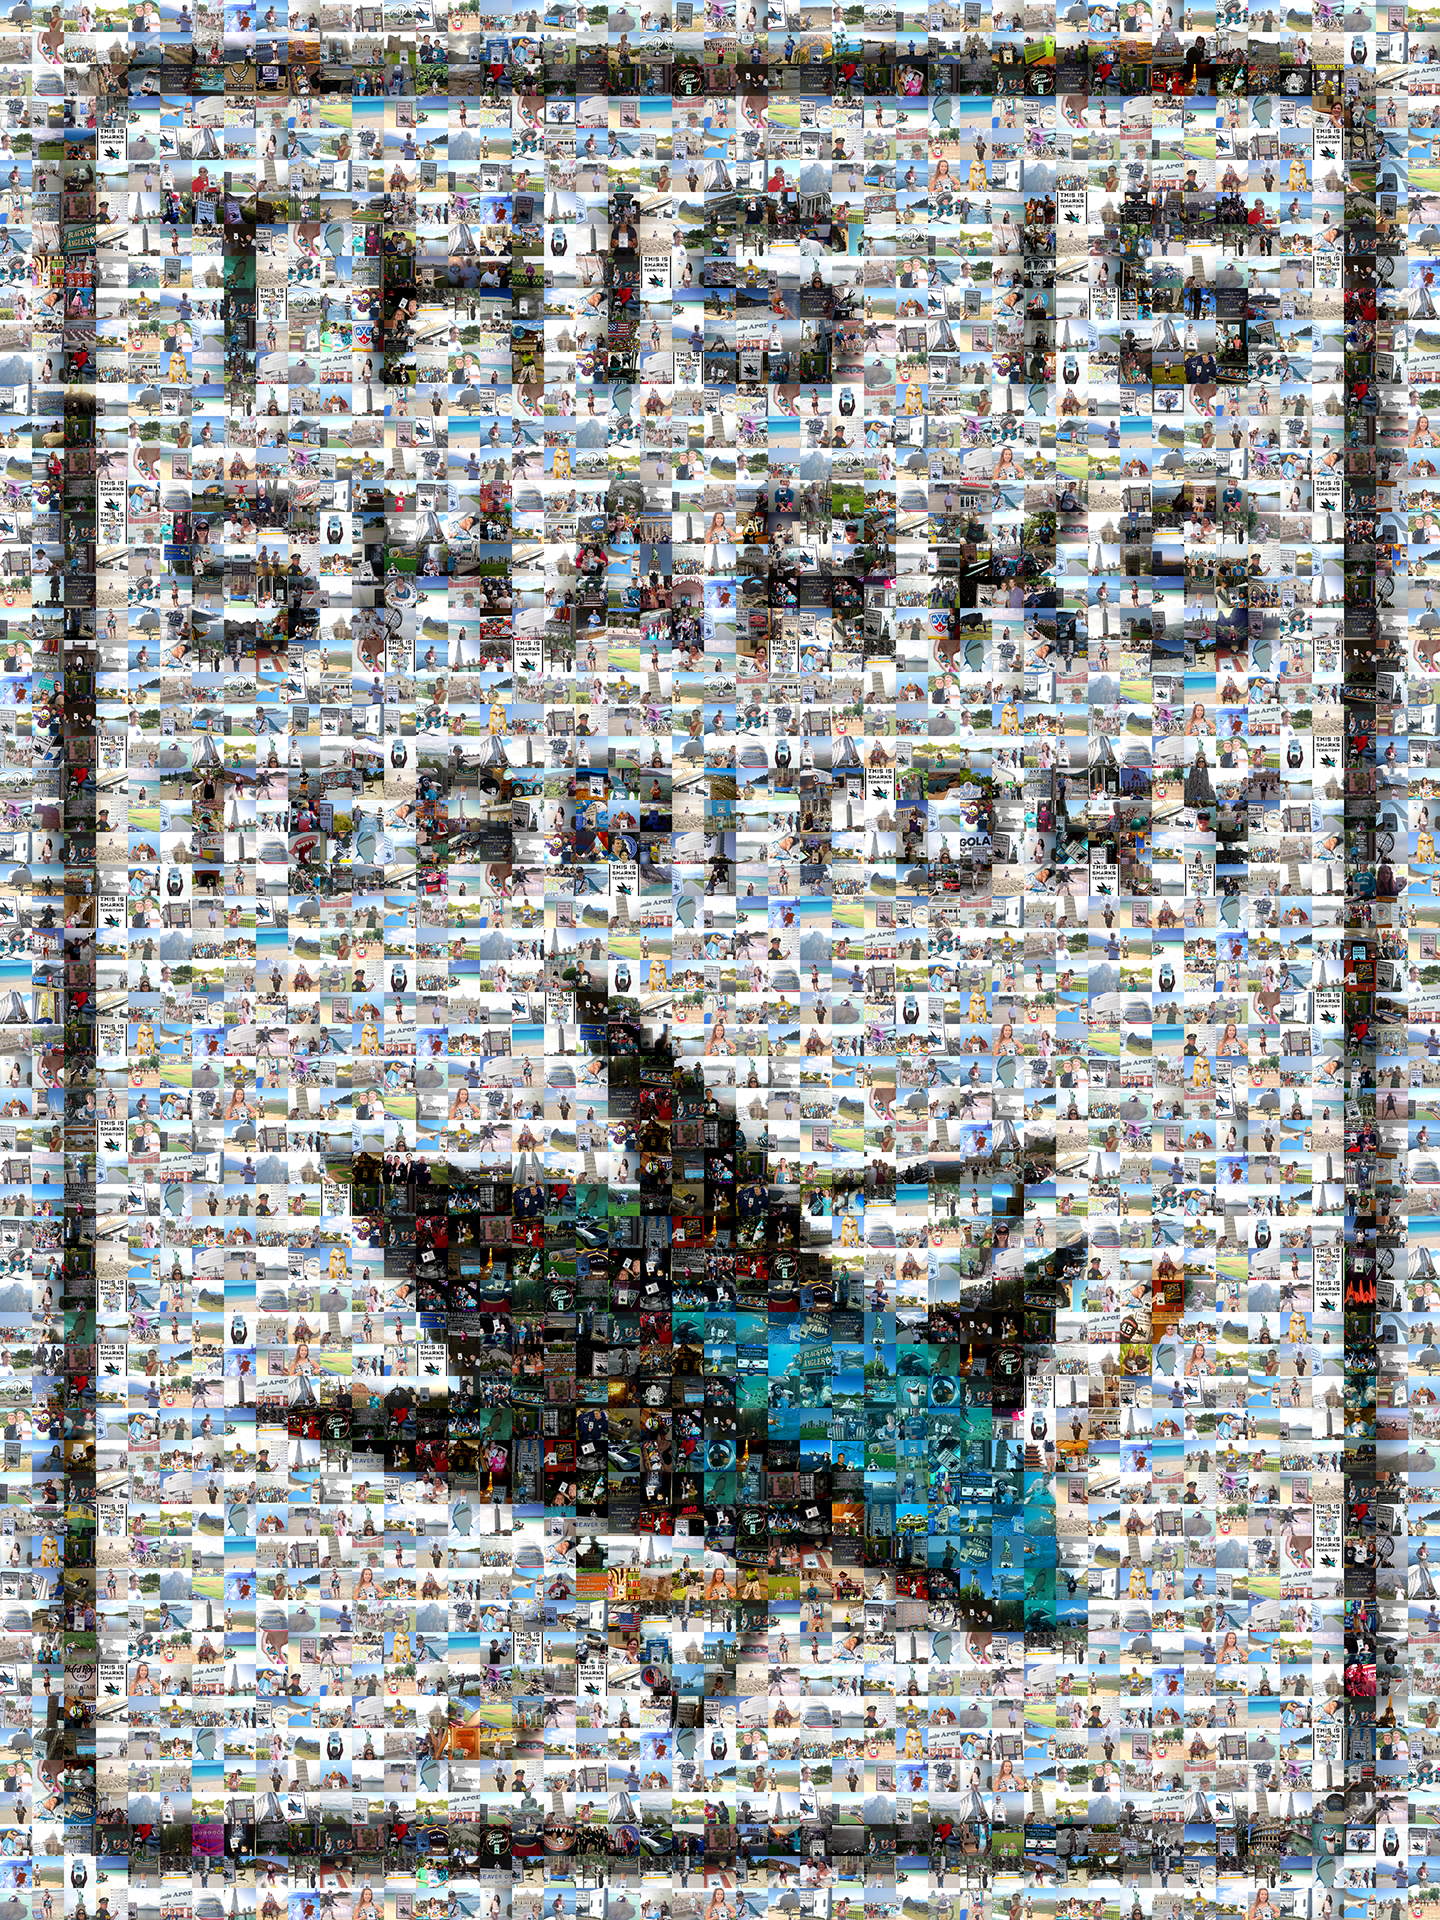 photo mosaic over 650 fan submitted photos make up this San Jose Sharks mosaic